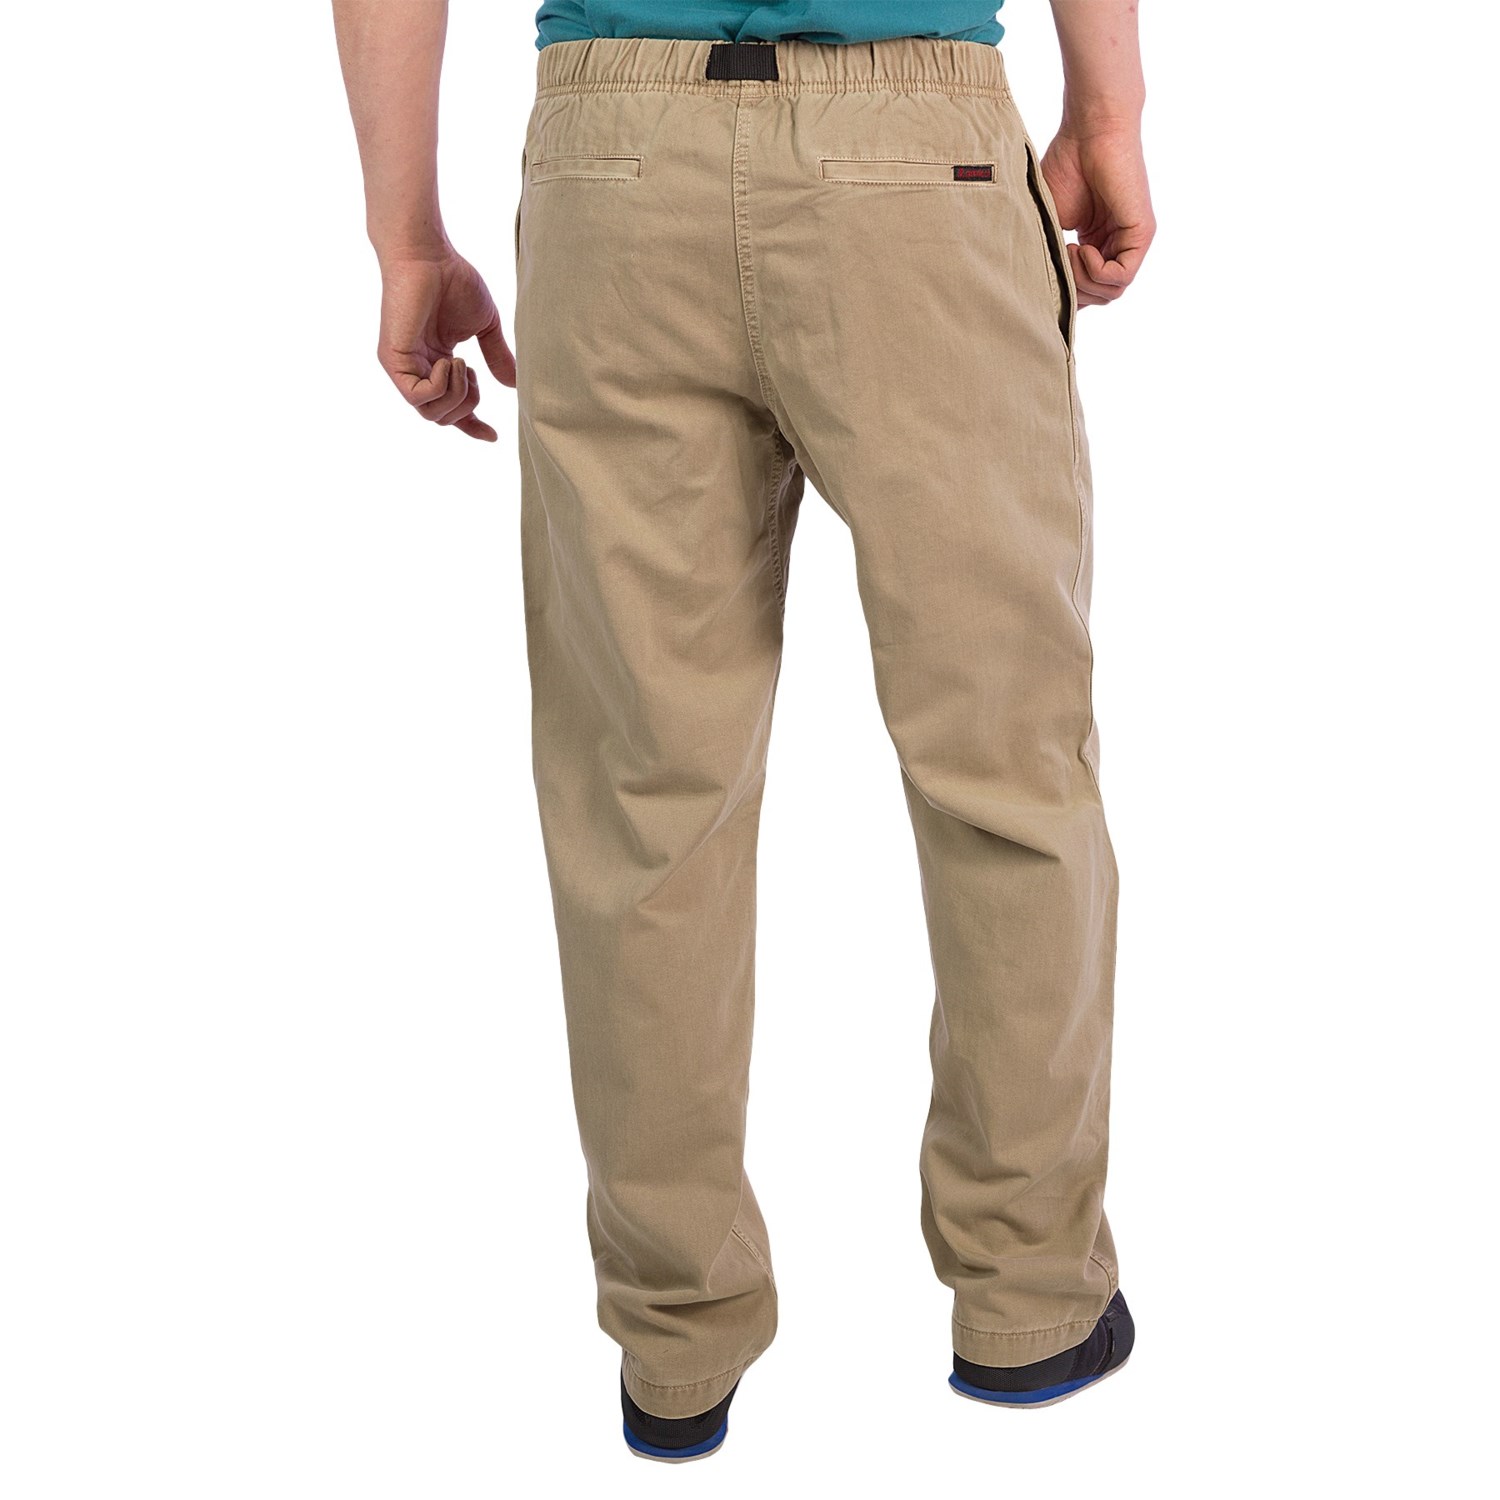 Gramicci Flannel-Lined Rockin’ Sport Pants (For Men) 7004T - Save 43%